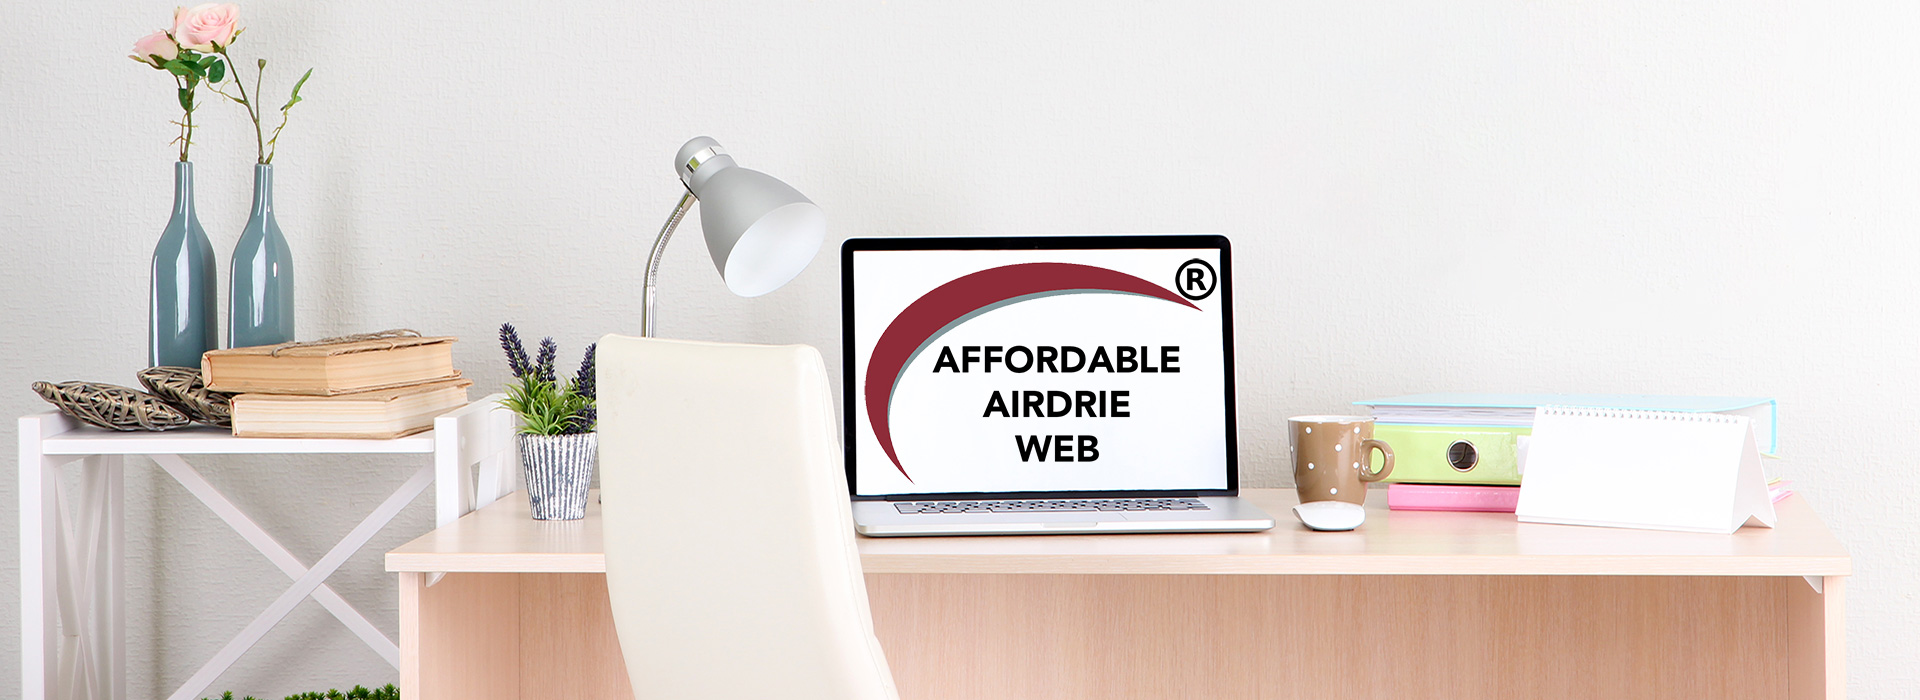 Affordable Airdrie Web concentrates on Airdrie and all locations within Rocky View County, Alberta.